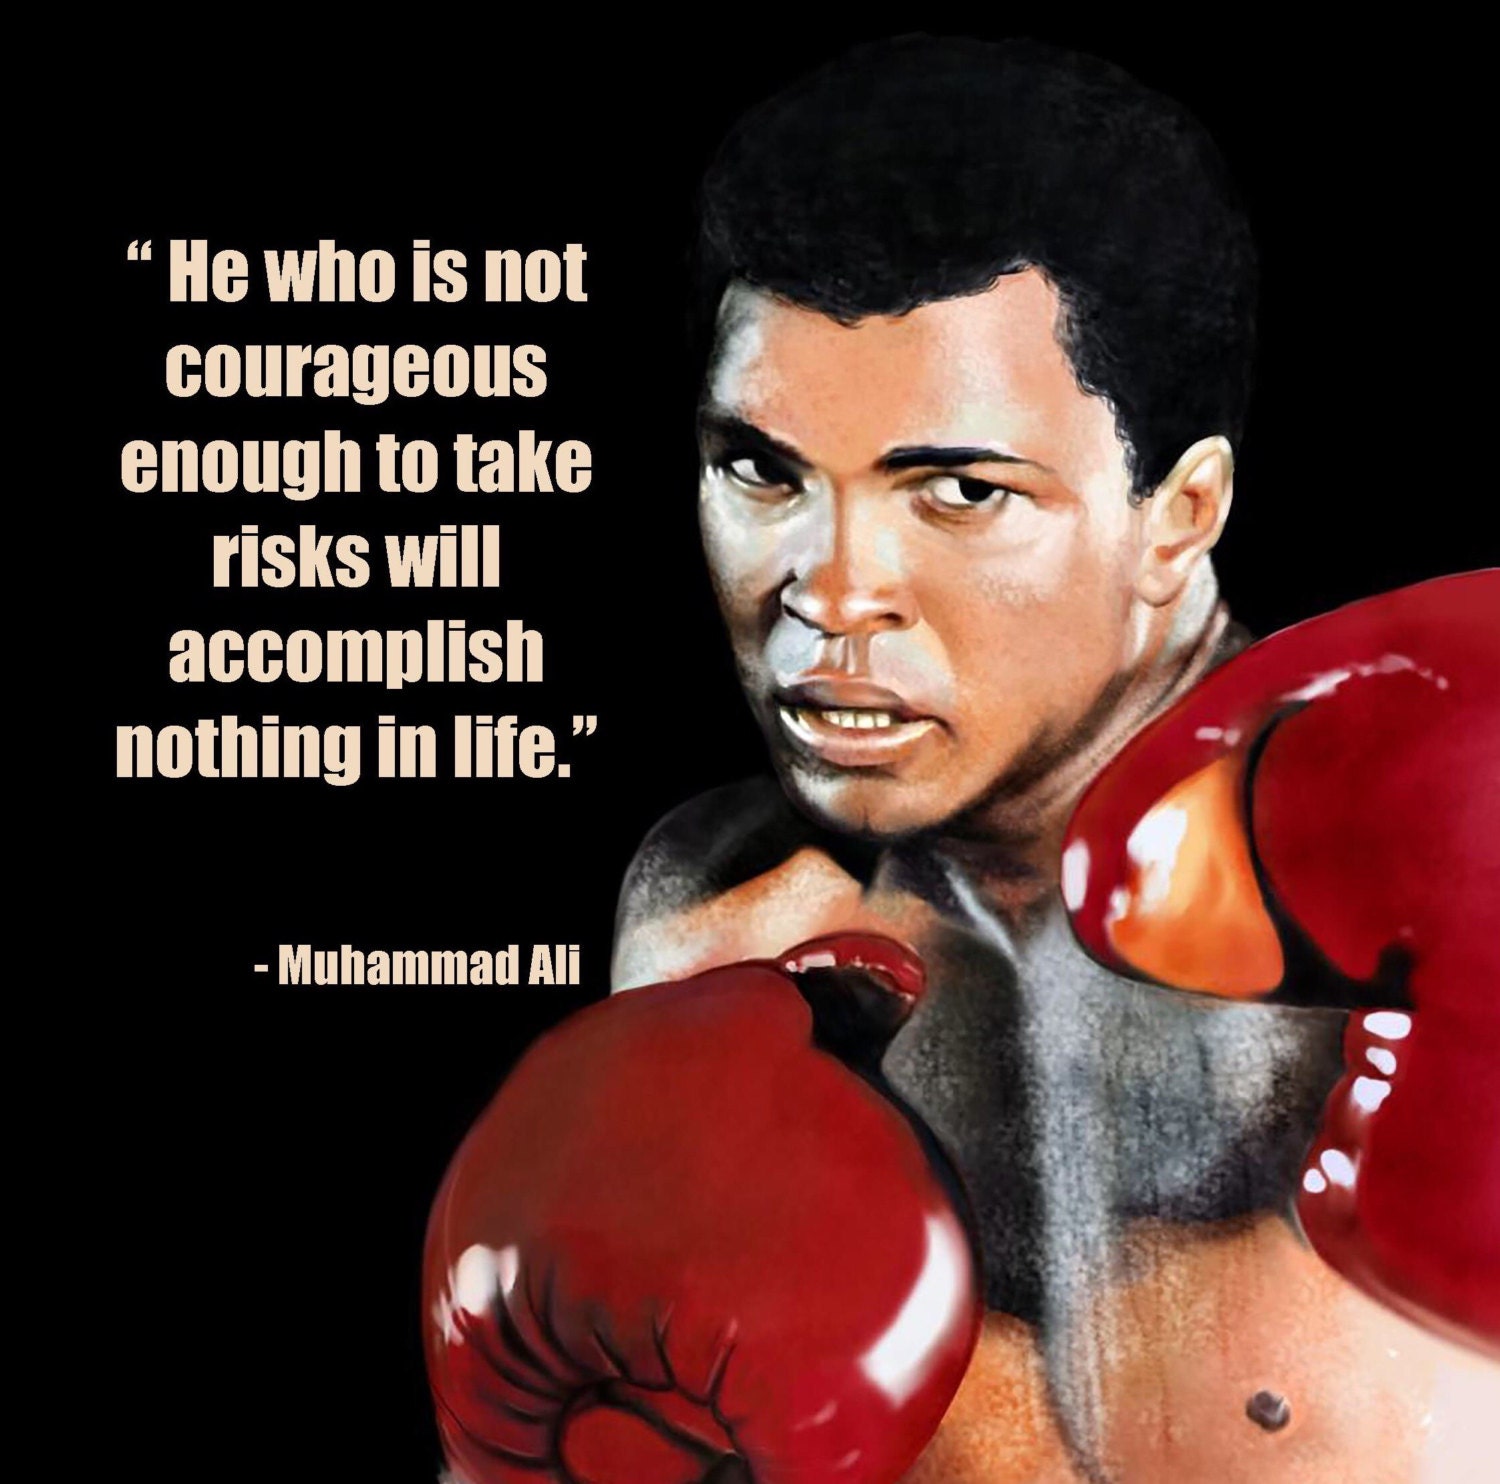 Boxing Legend Muhammad Ali Inspirational Courageous Life Quote photo